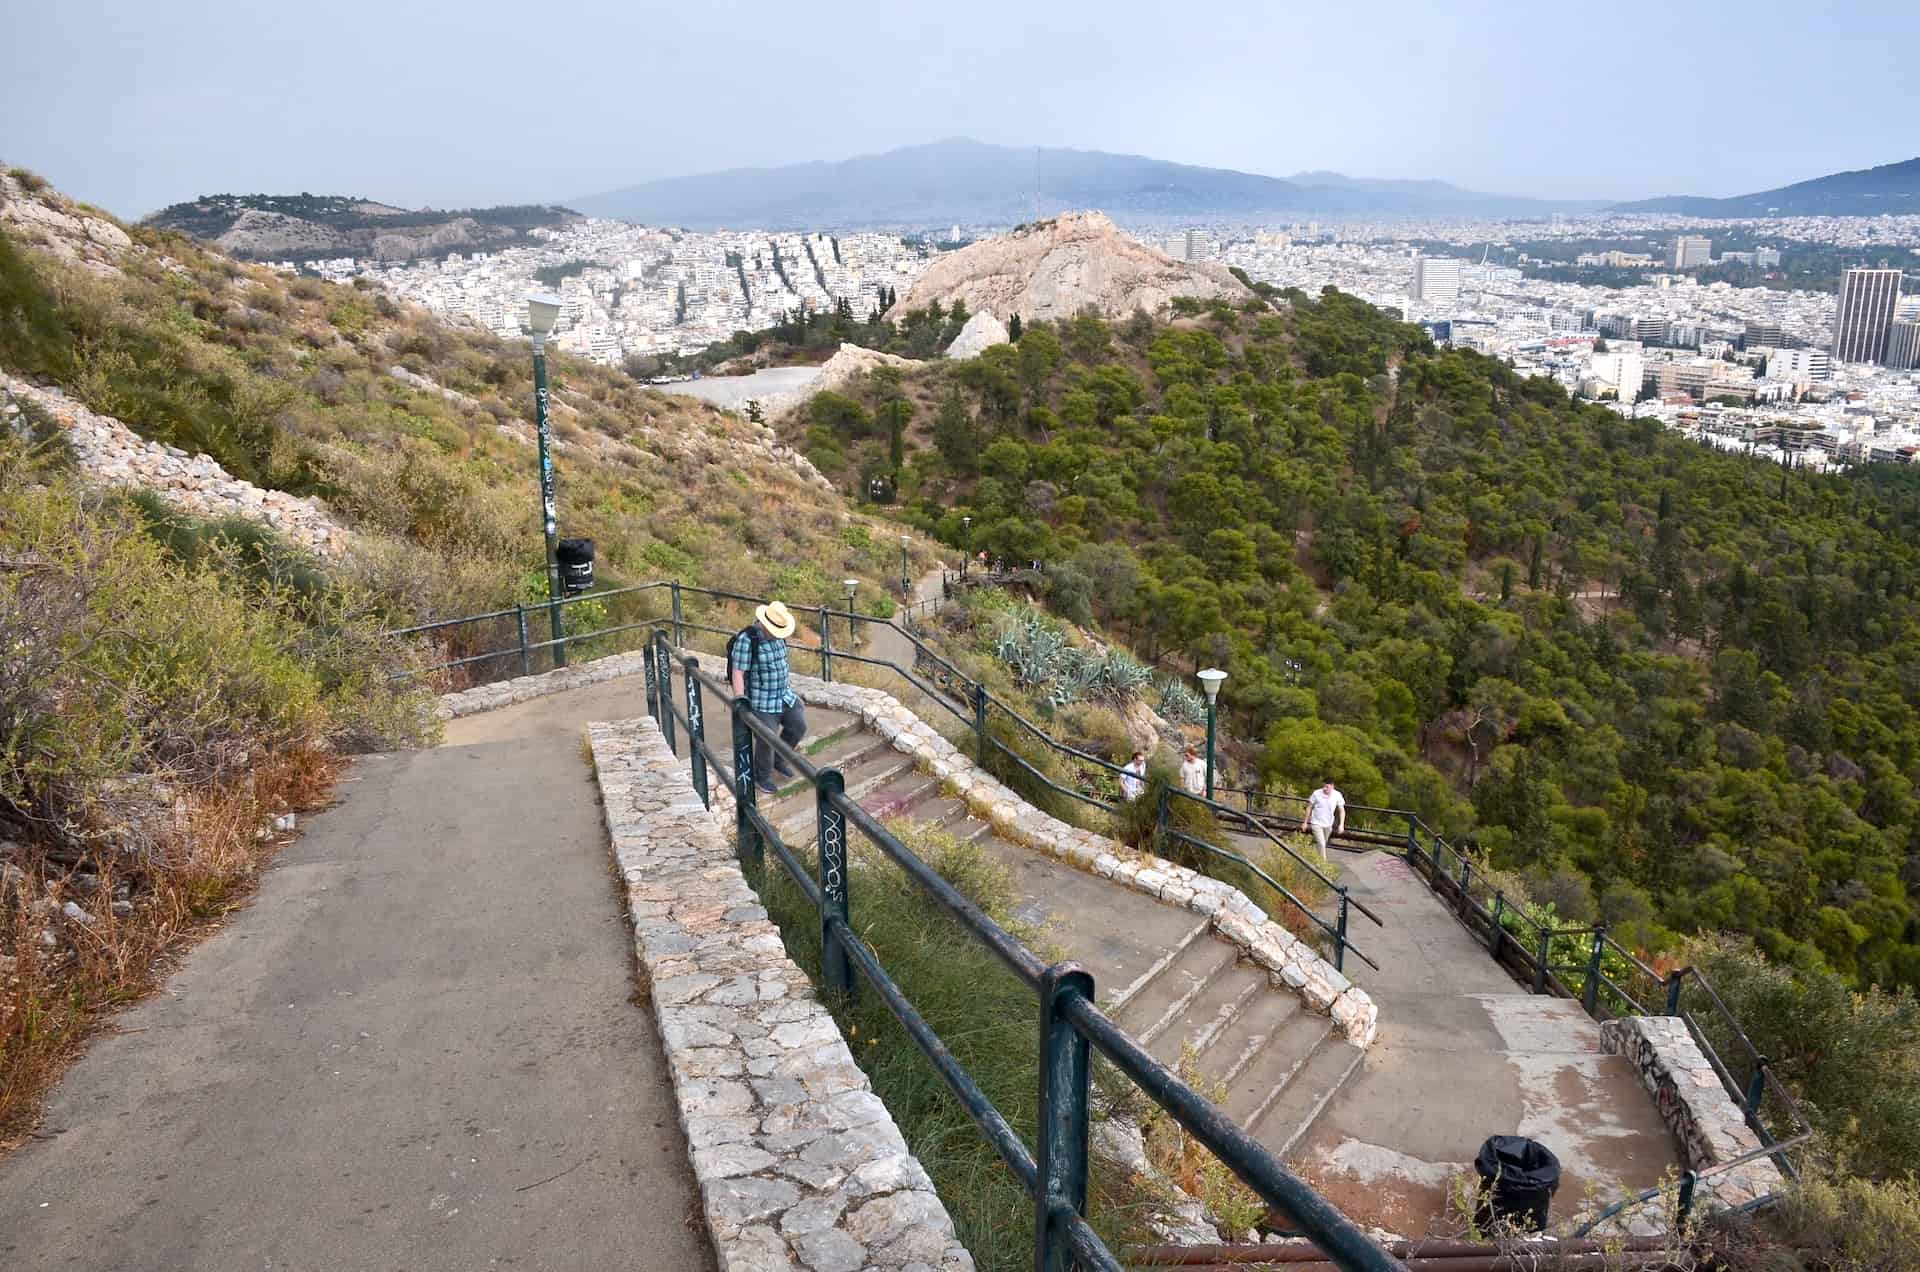 Trail at Lycabettus Hill in Athens, Greece